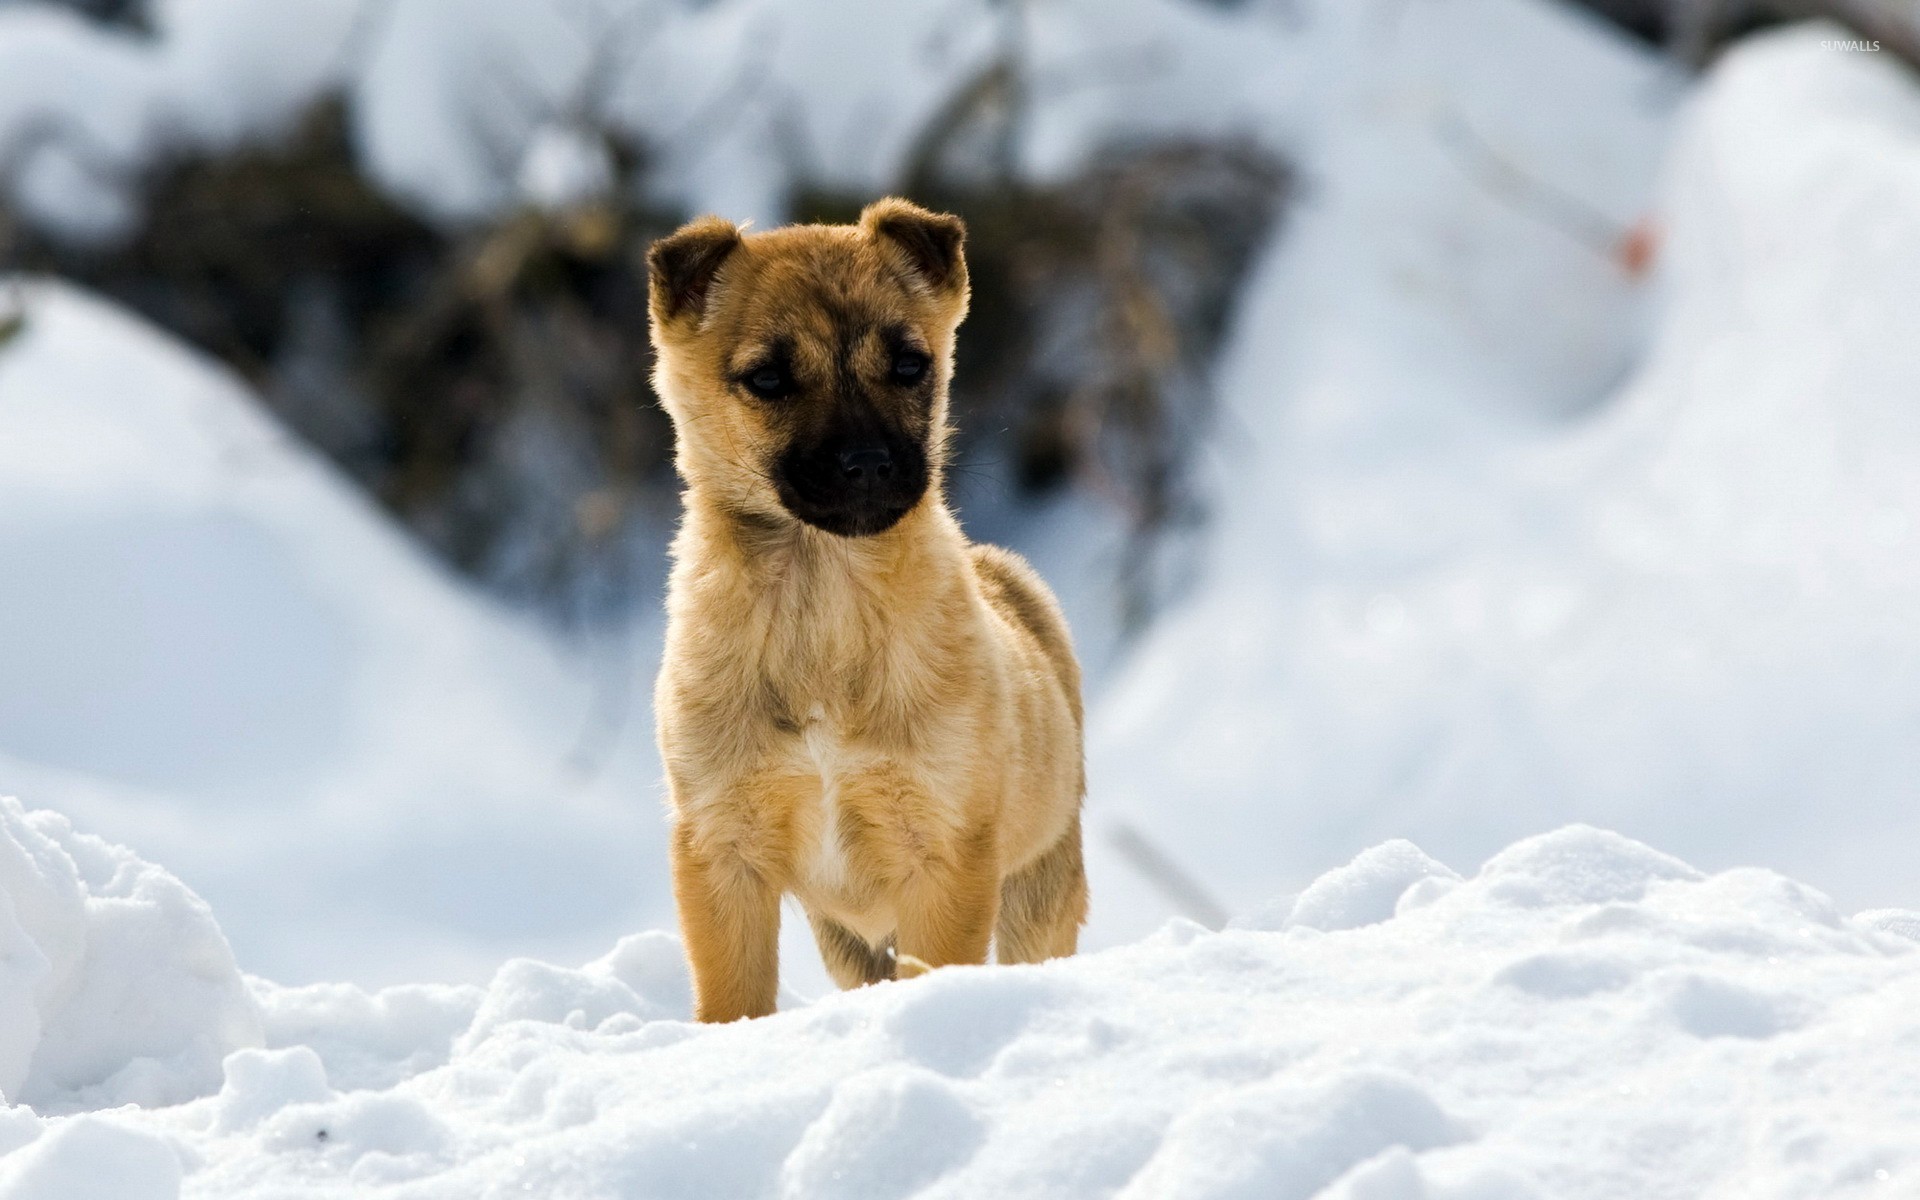 Puppy in the snow wallpaper - Animal wallpapers - #26117